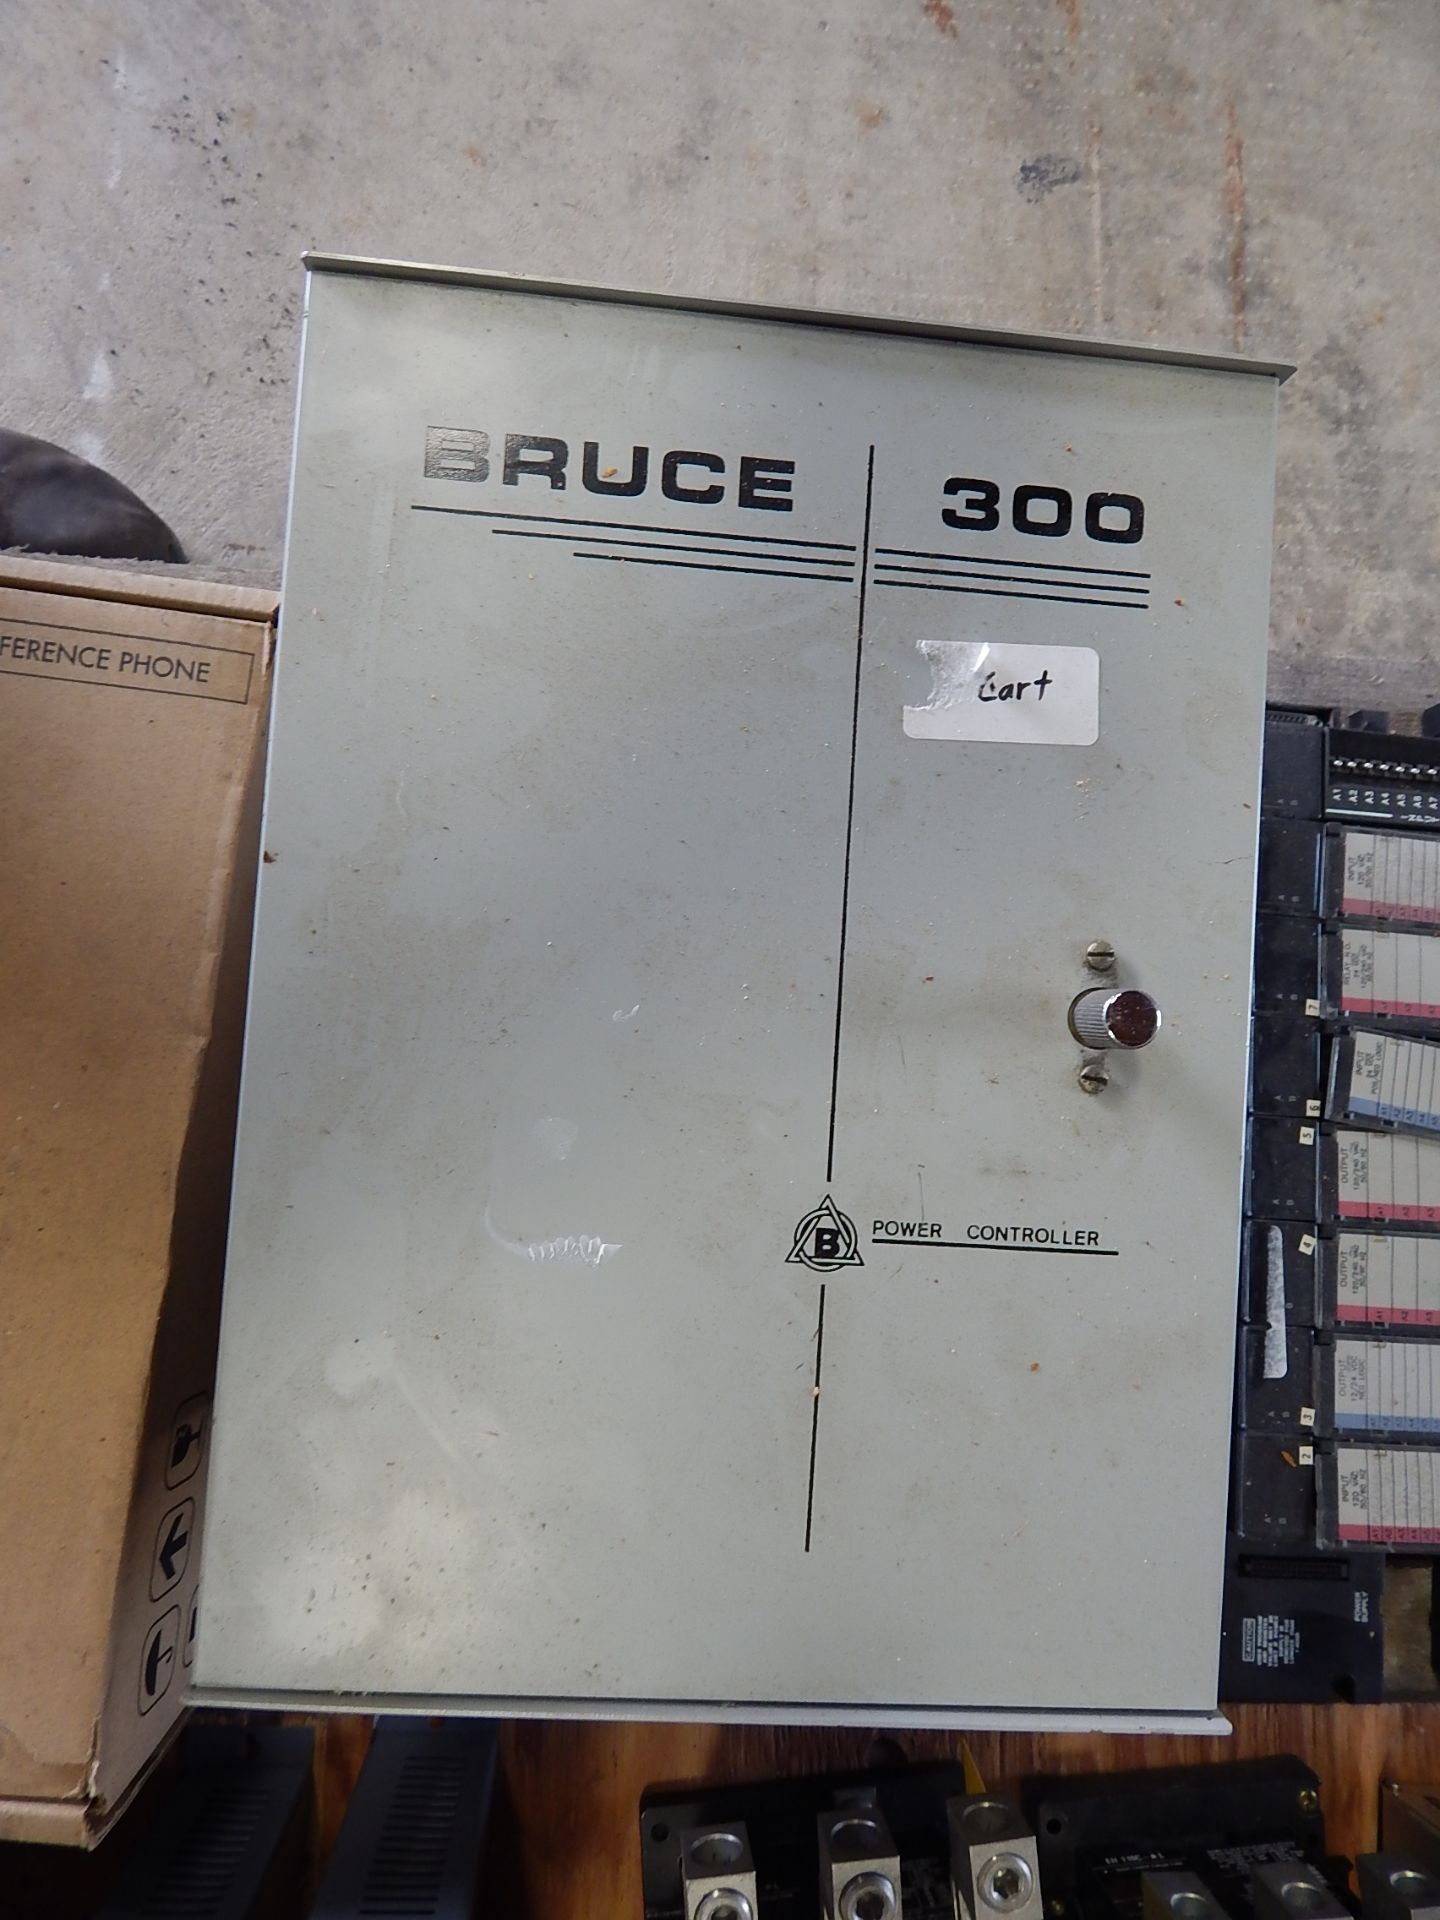 Bruce 300 Power Controller Location of Lot 2696 E. Lytle-Five Points Rd., Centerville, Ohio